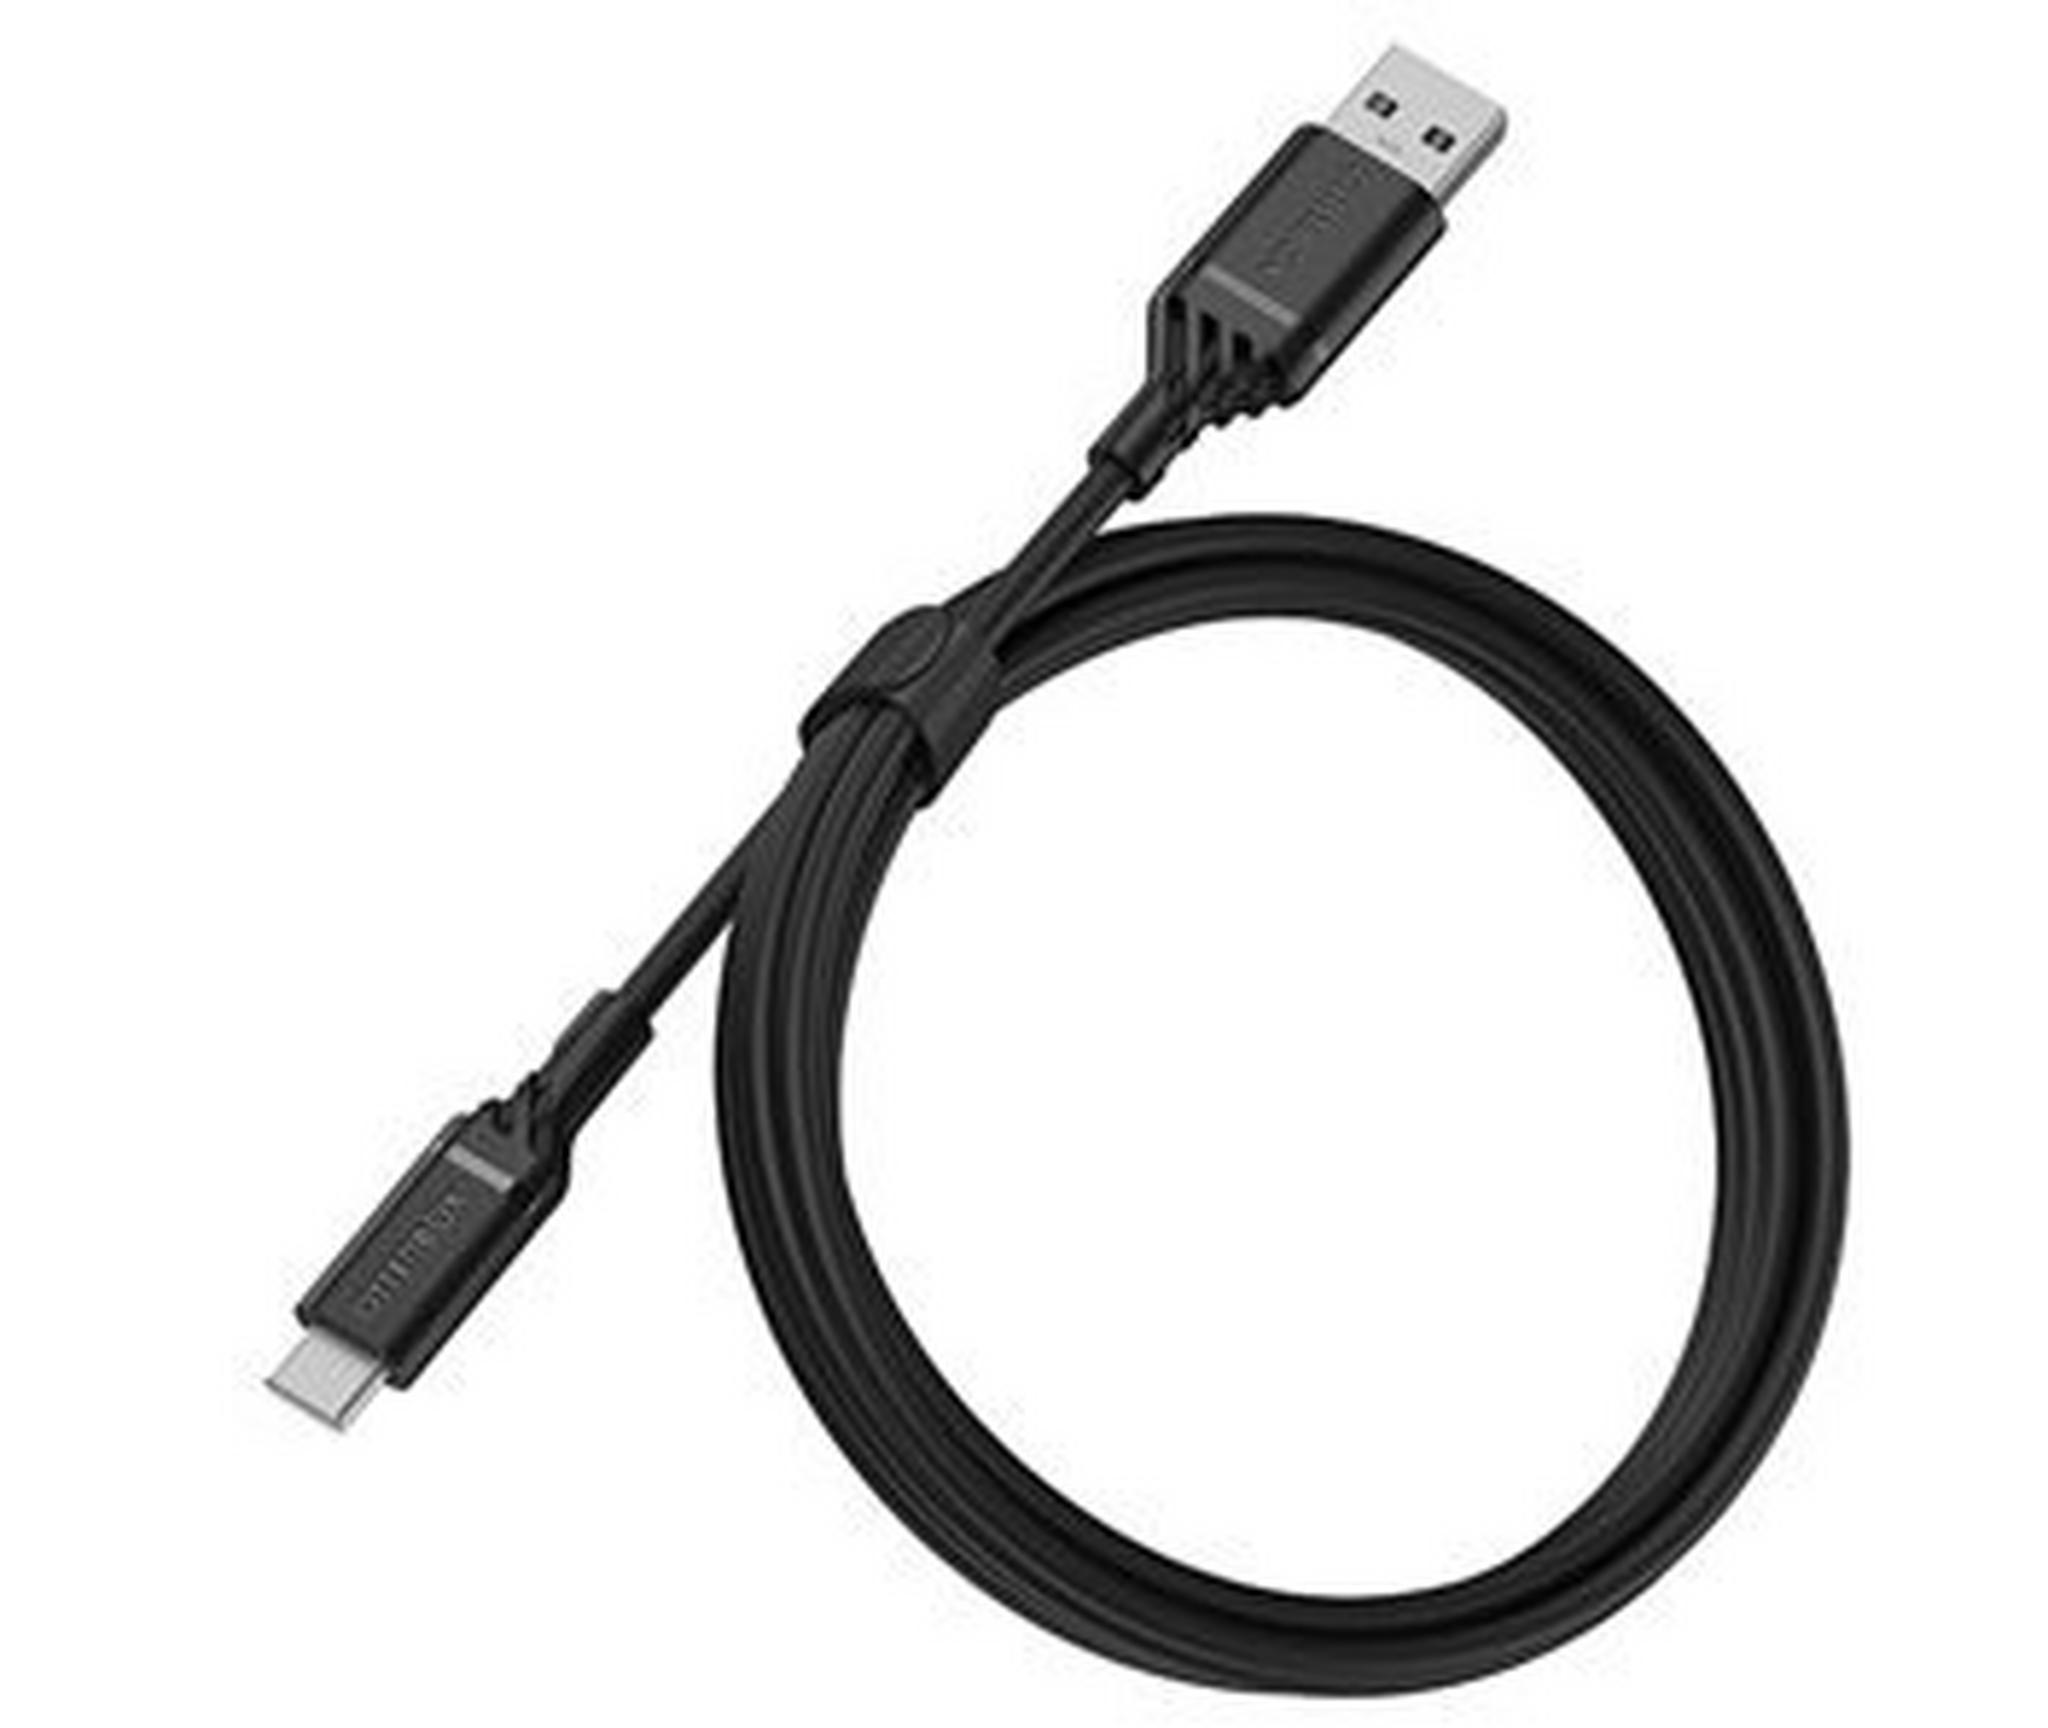 OtterBox USB-A to USB-C Cable 2-Meter (78-52659) - Black